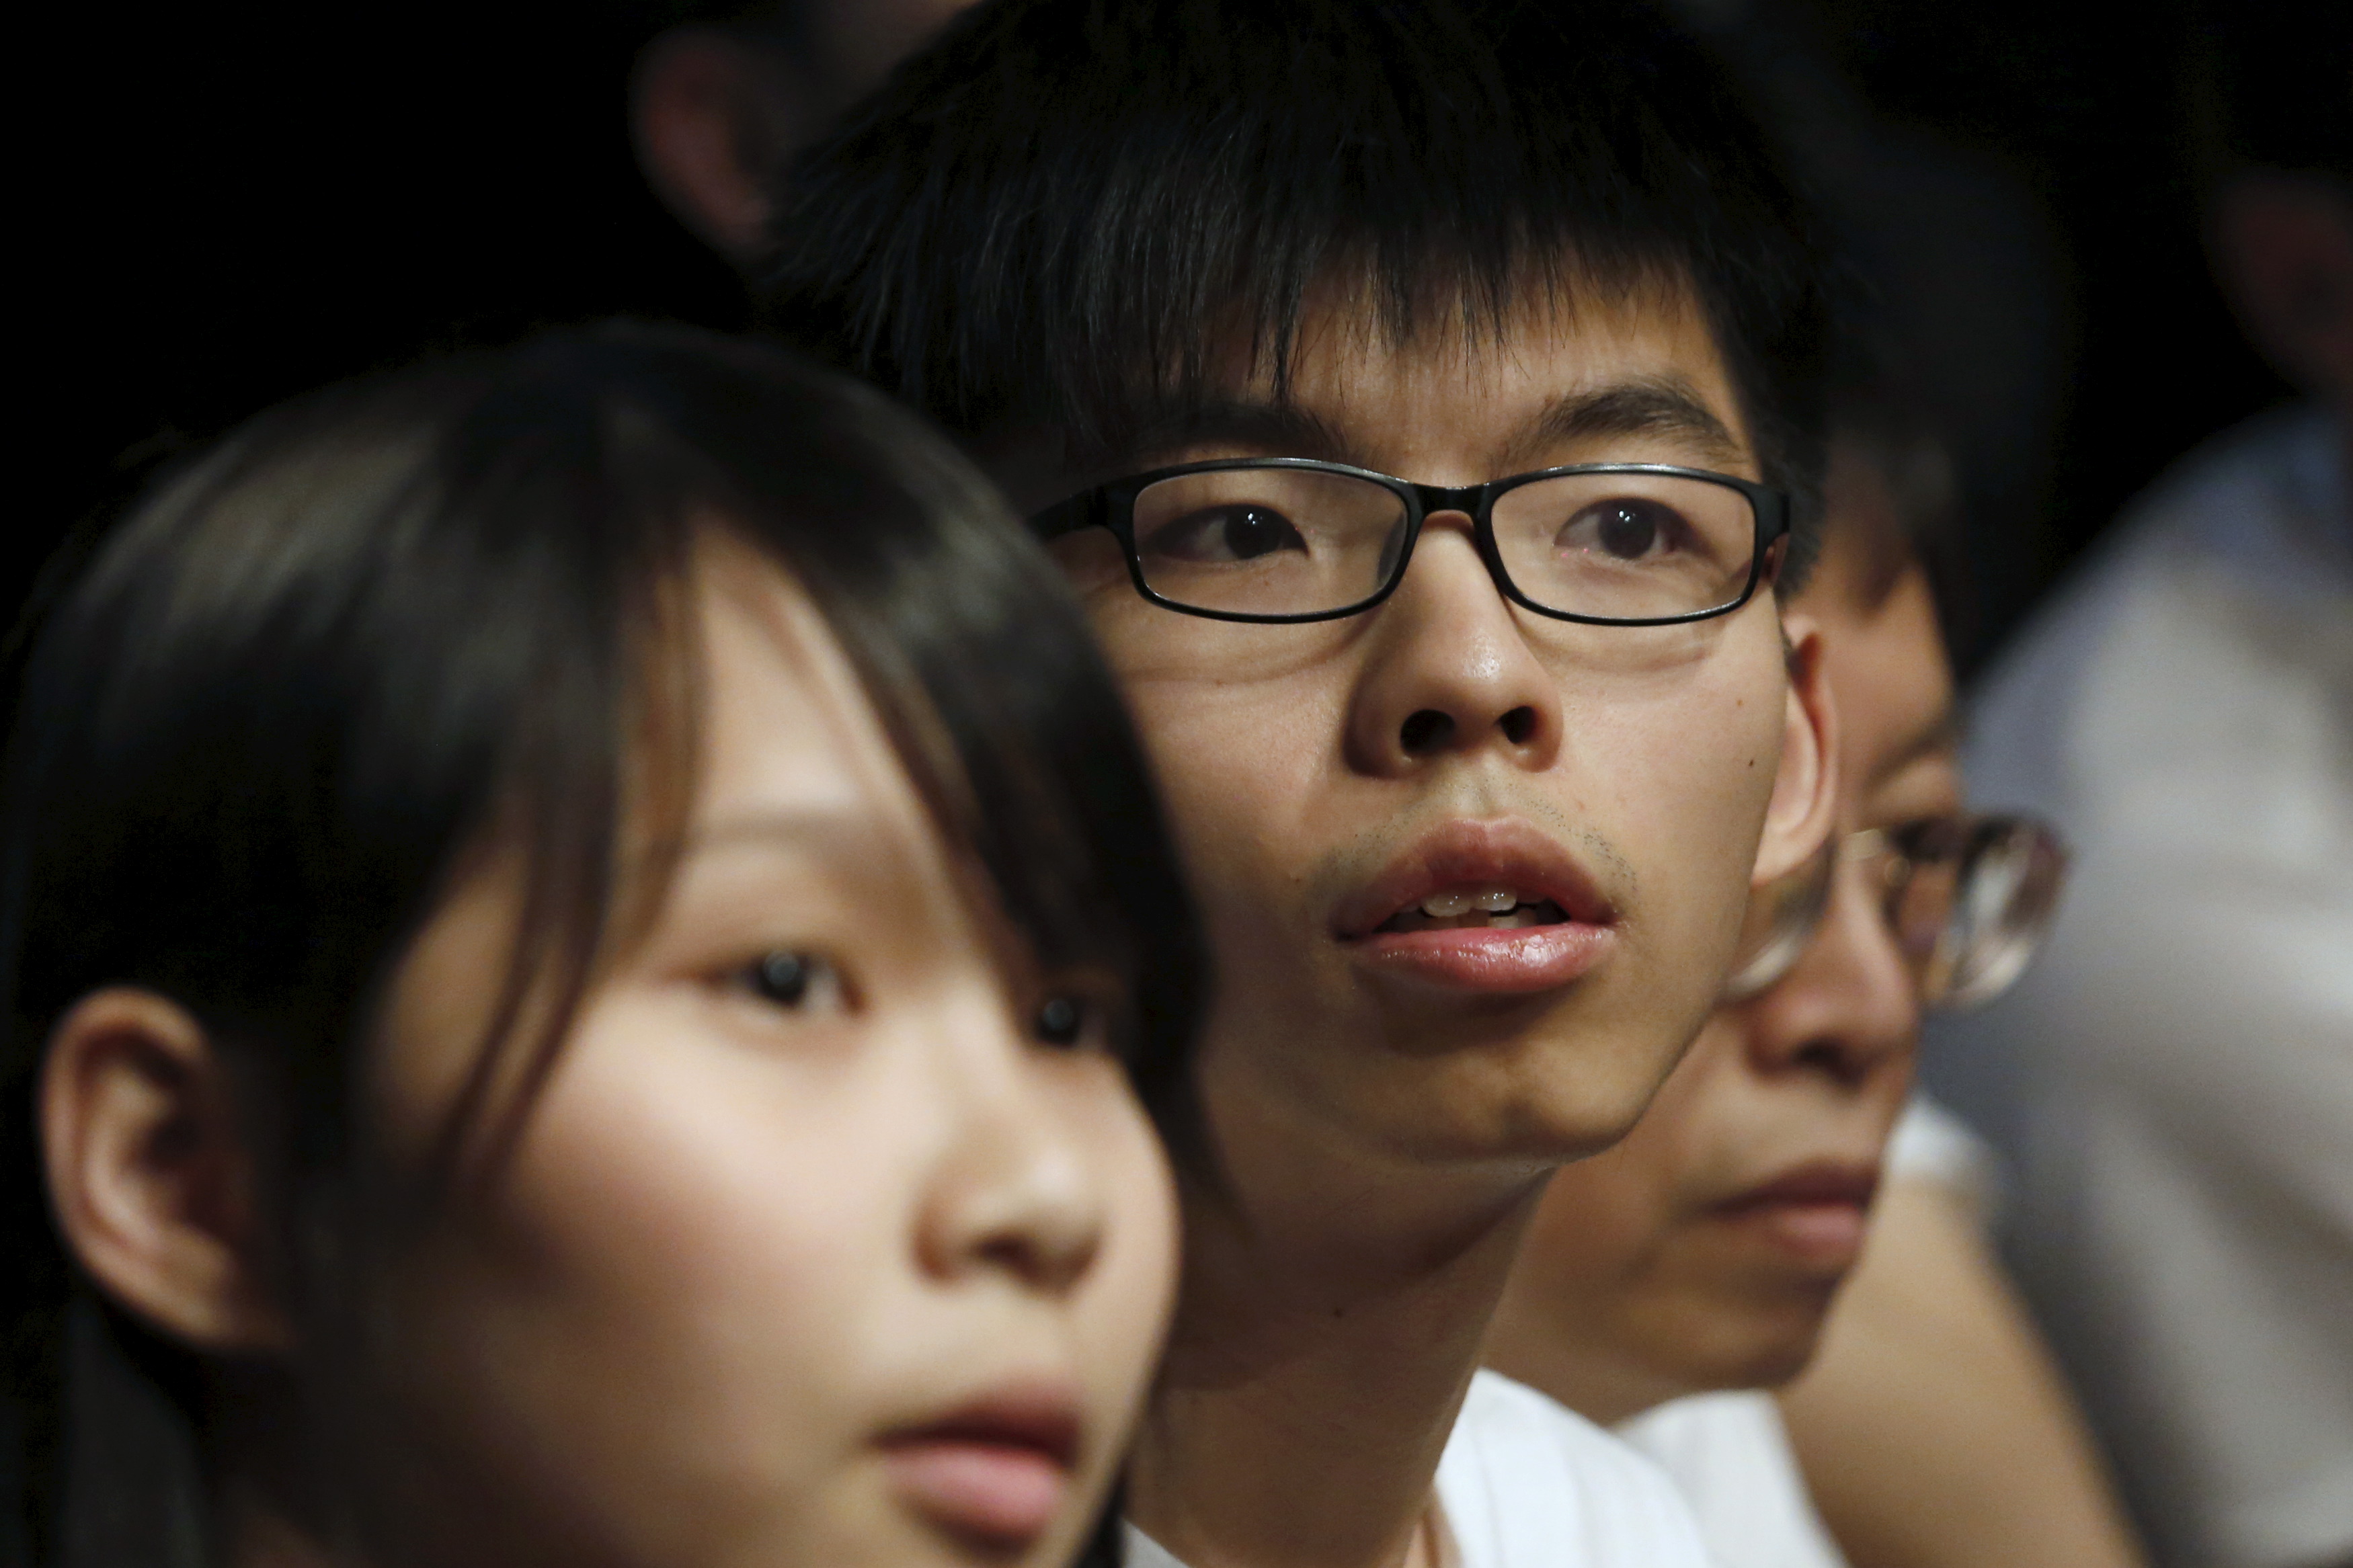 Student leaders Joshua Wong and Agnes Chow attend the launching ceremony of their new political party Demosisto in Hong Kong